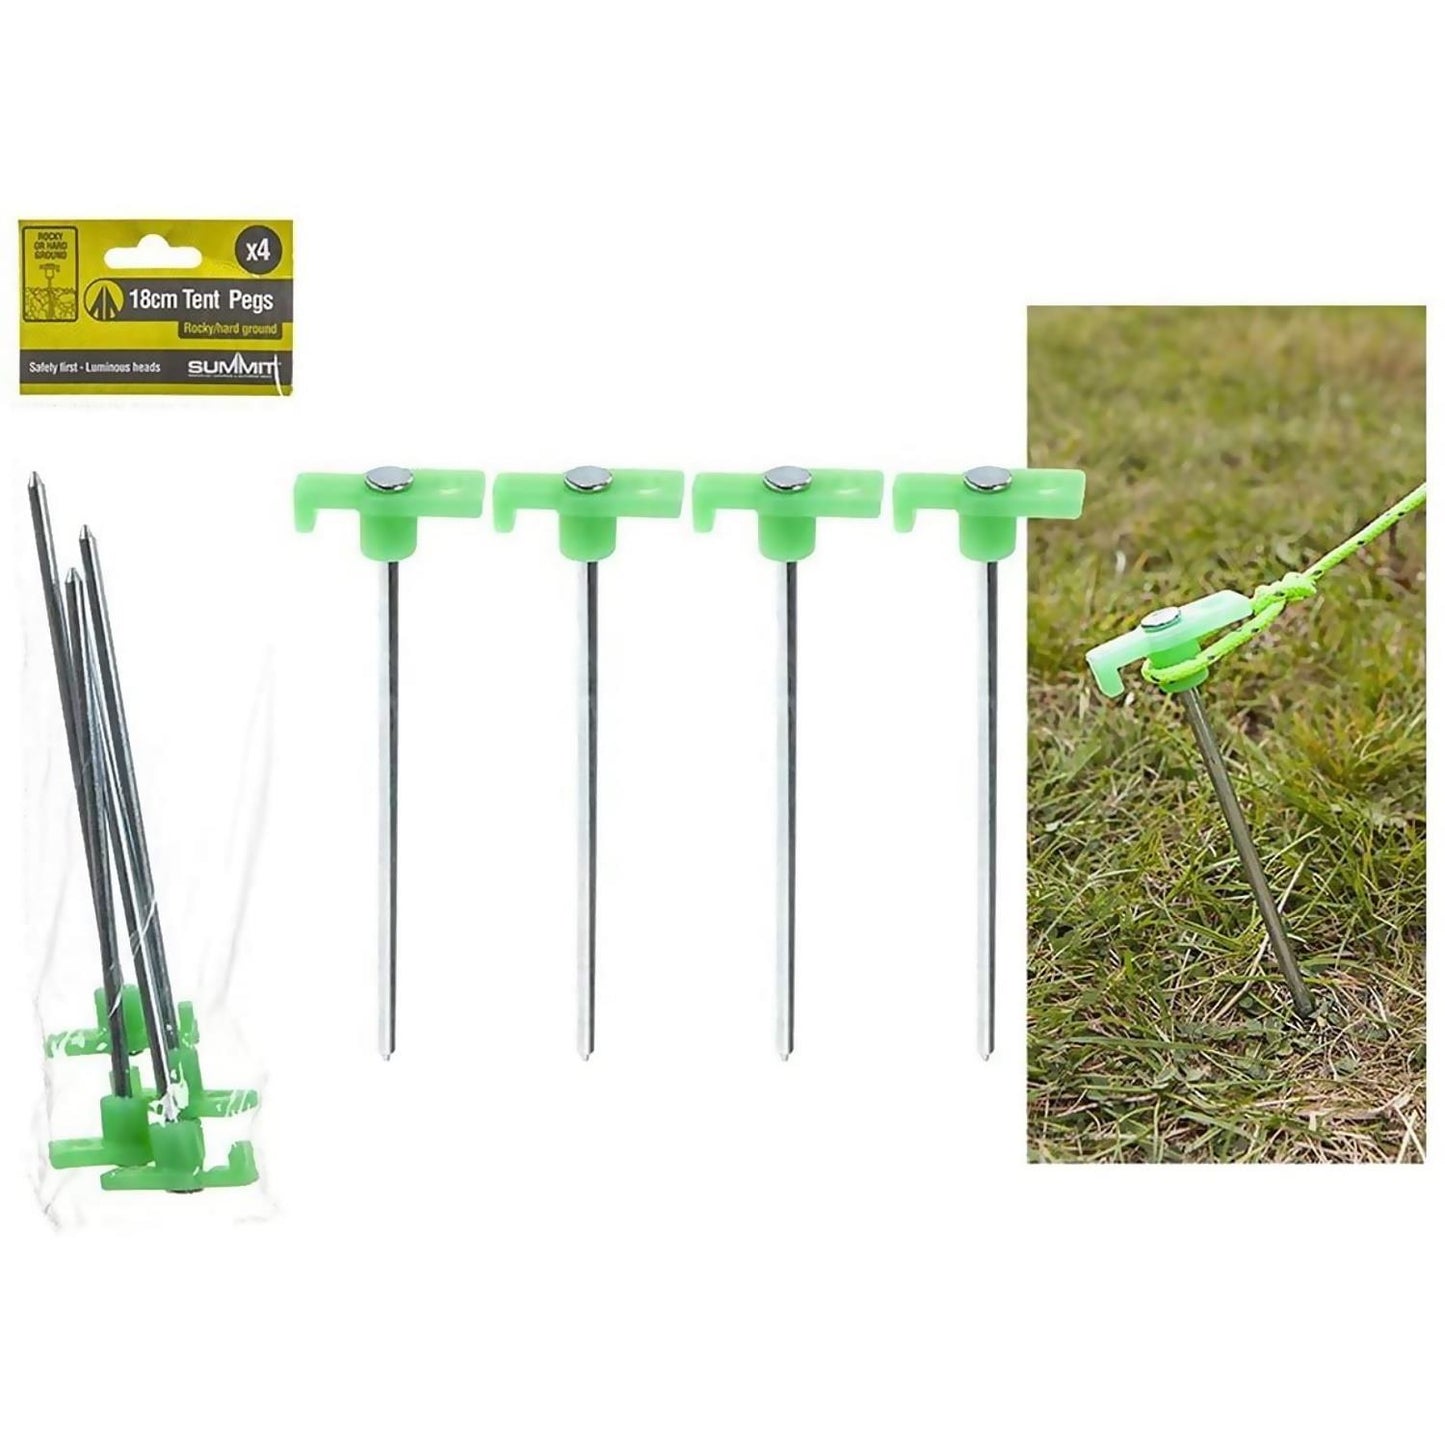 Glow-In-The-Dark Ground Rock 7-Inch Pegs For Tents